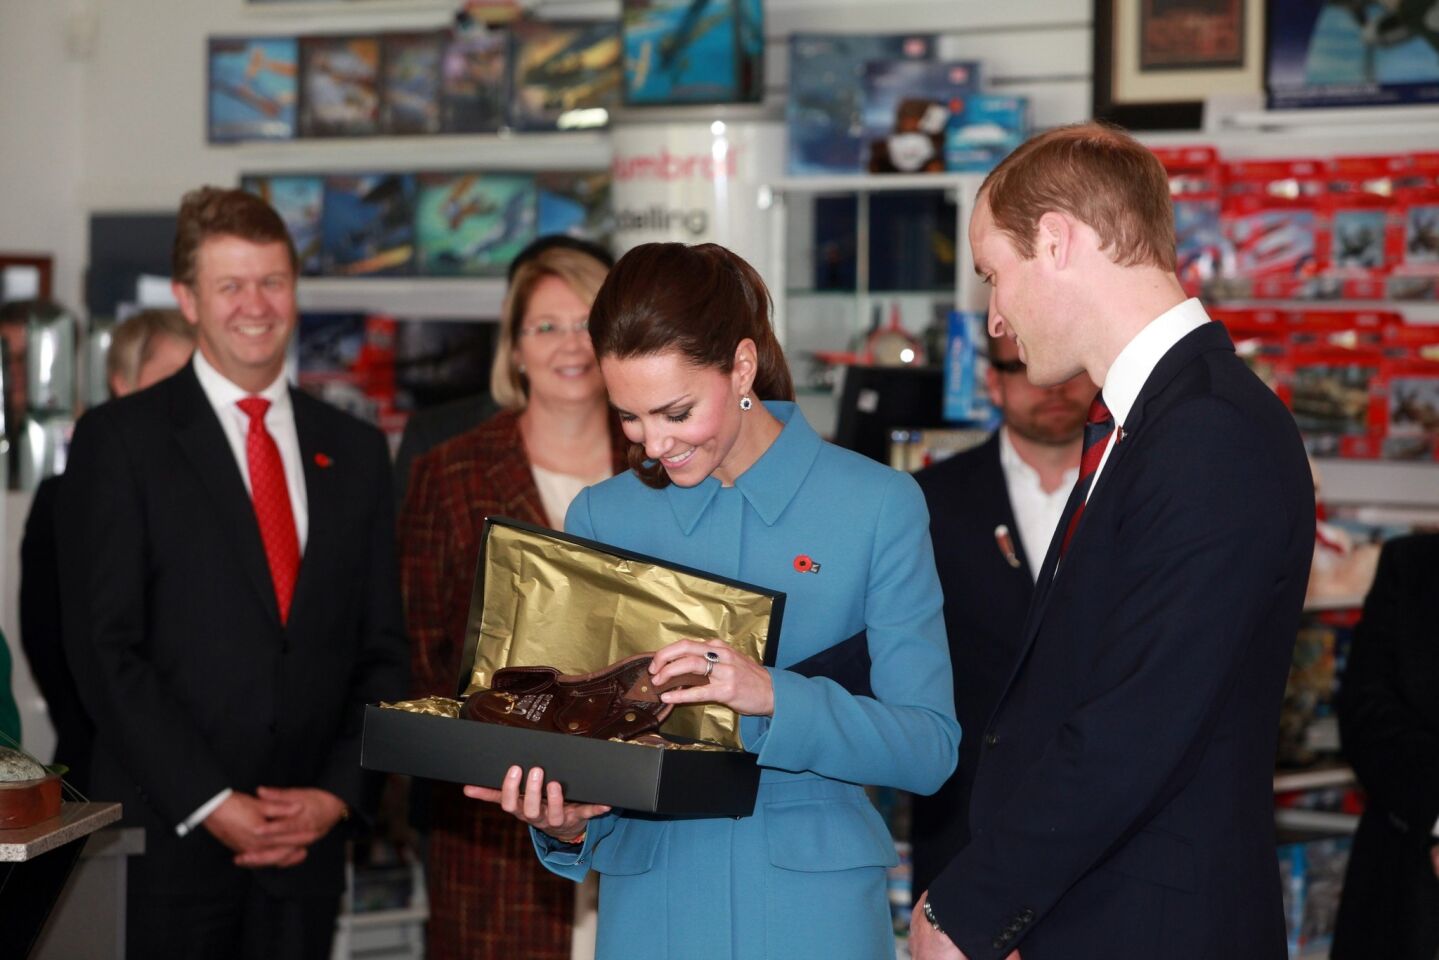 The duke and duchess receive a gift for Prince George during their visit to the "Knights of the Sky" exhibition at the Omaka Aviation Heritage Center in Blenheim, New Zealand.